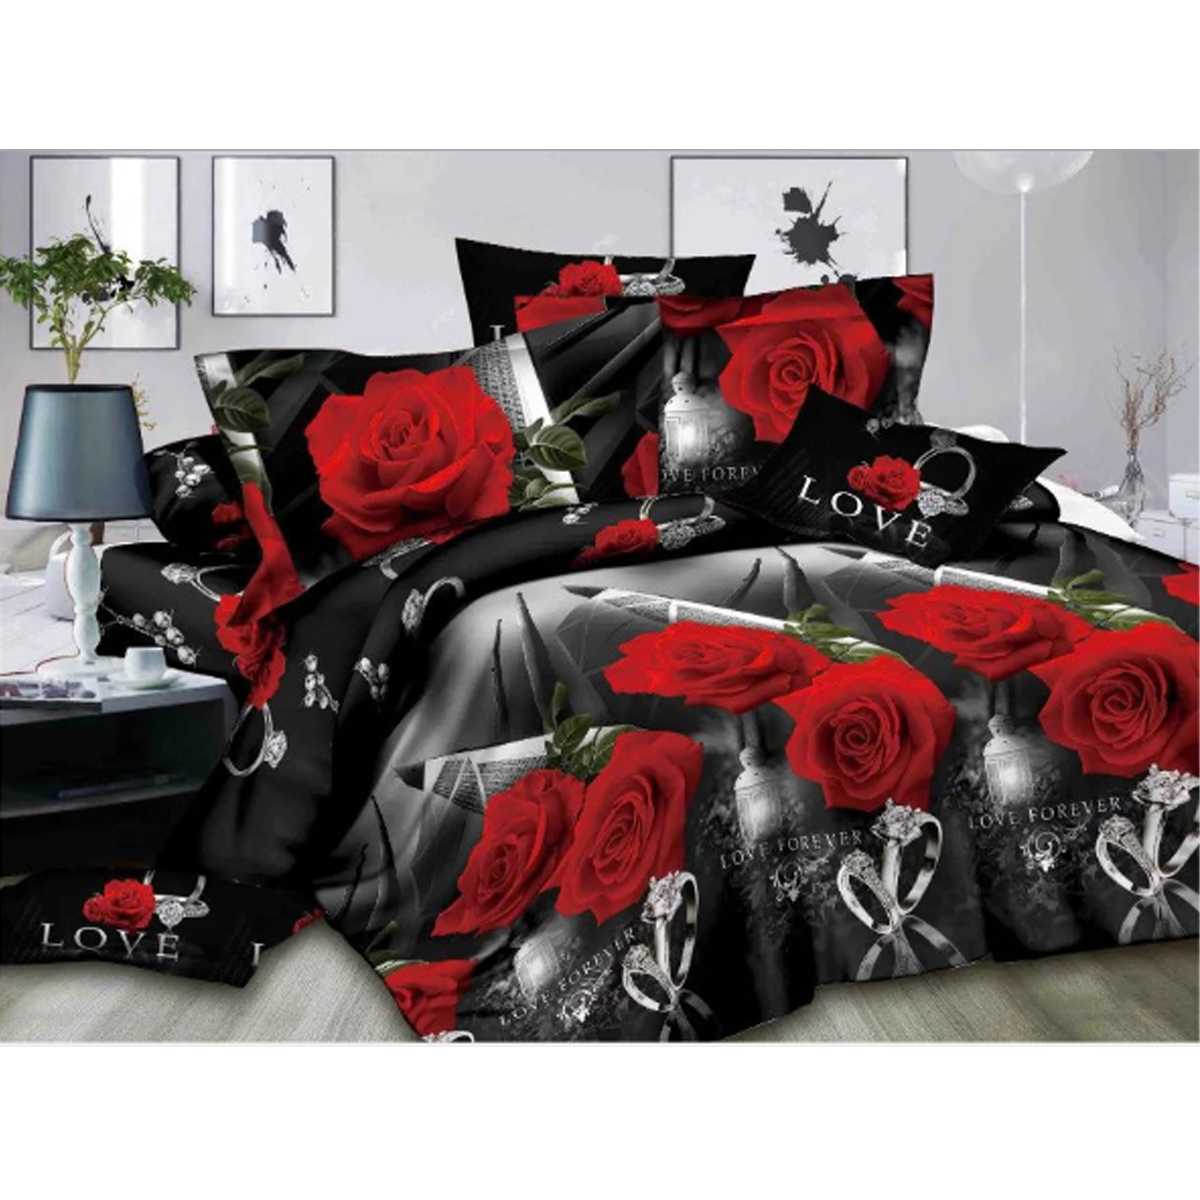 

3PCS 3D Stereoscopic Rose/Diamond Ring Printed Cotton Bedding Sets For King Bed